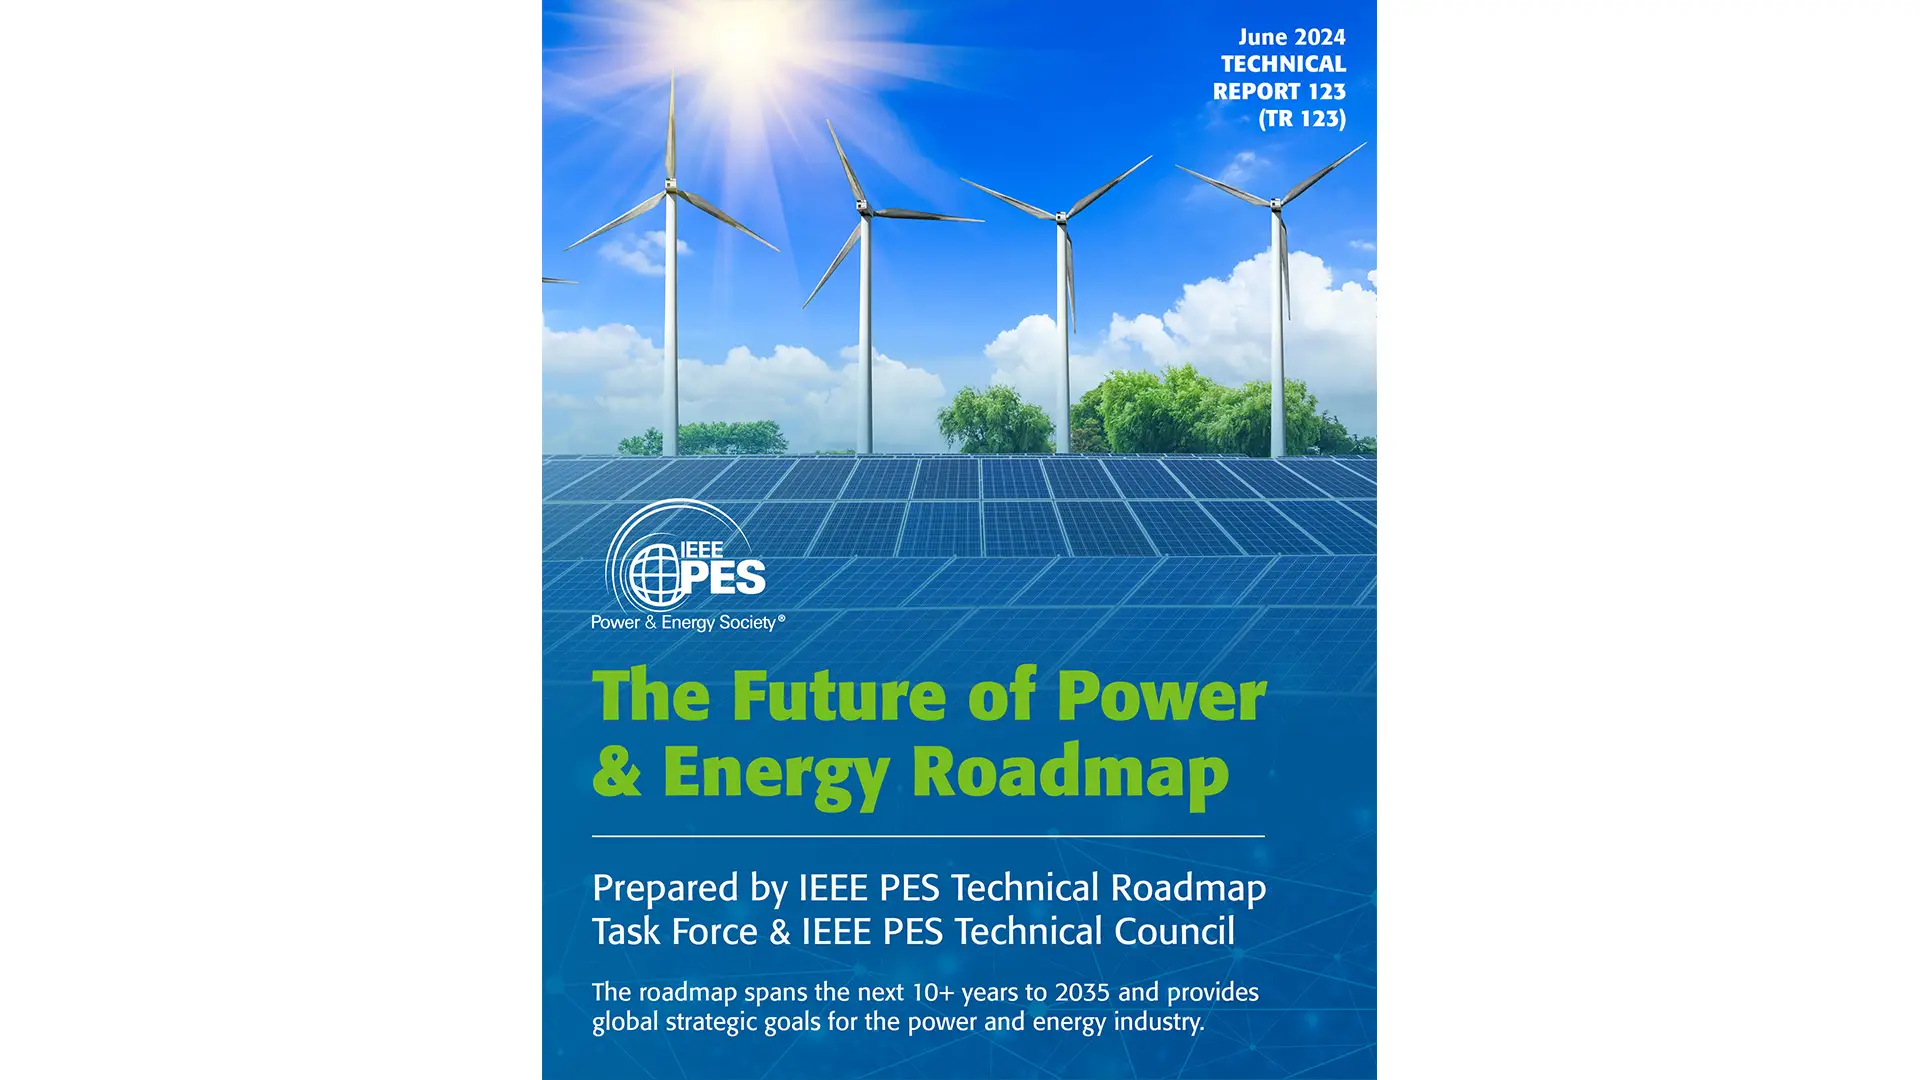 IEEE Power and Energy Technology Assessment and Roadmap (TR 123)